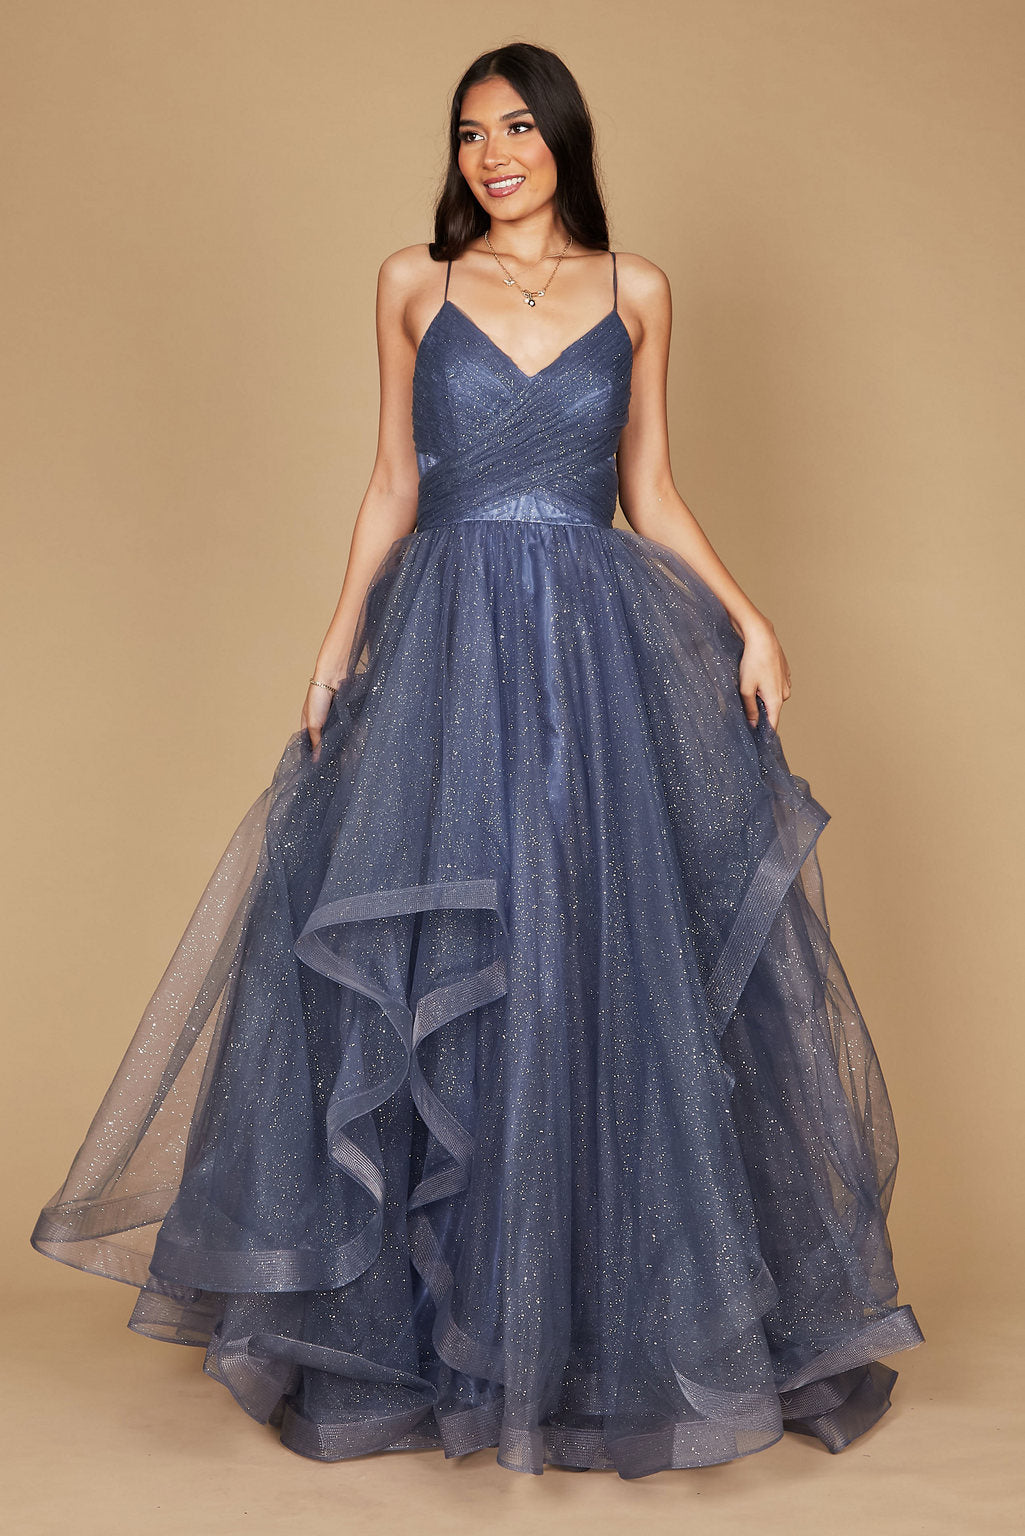 Prom Dresses Sparkling Long Formal Ball Gown Periwinkle